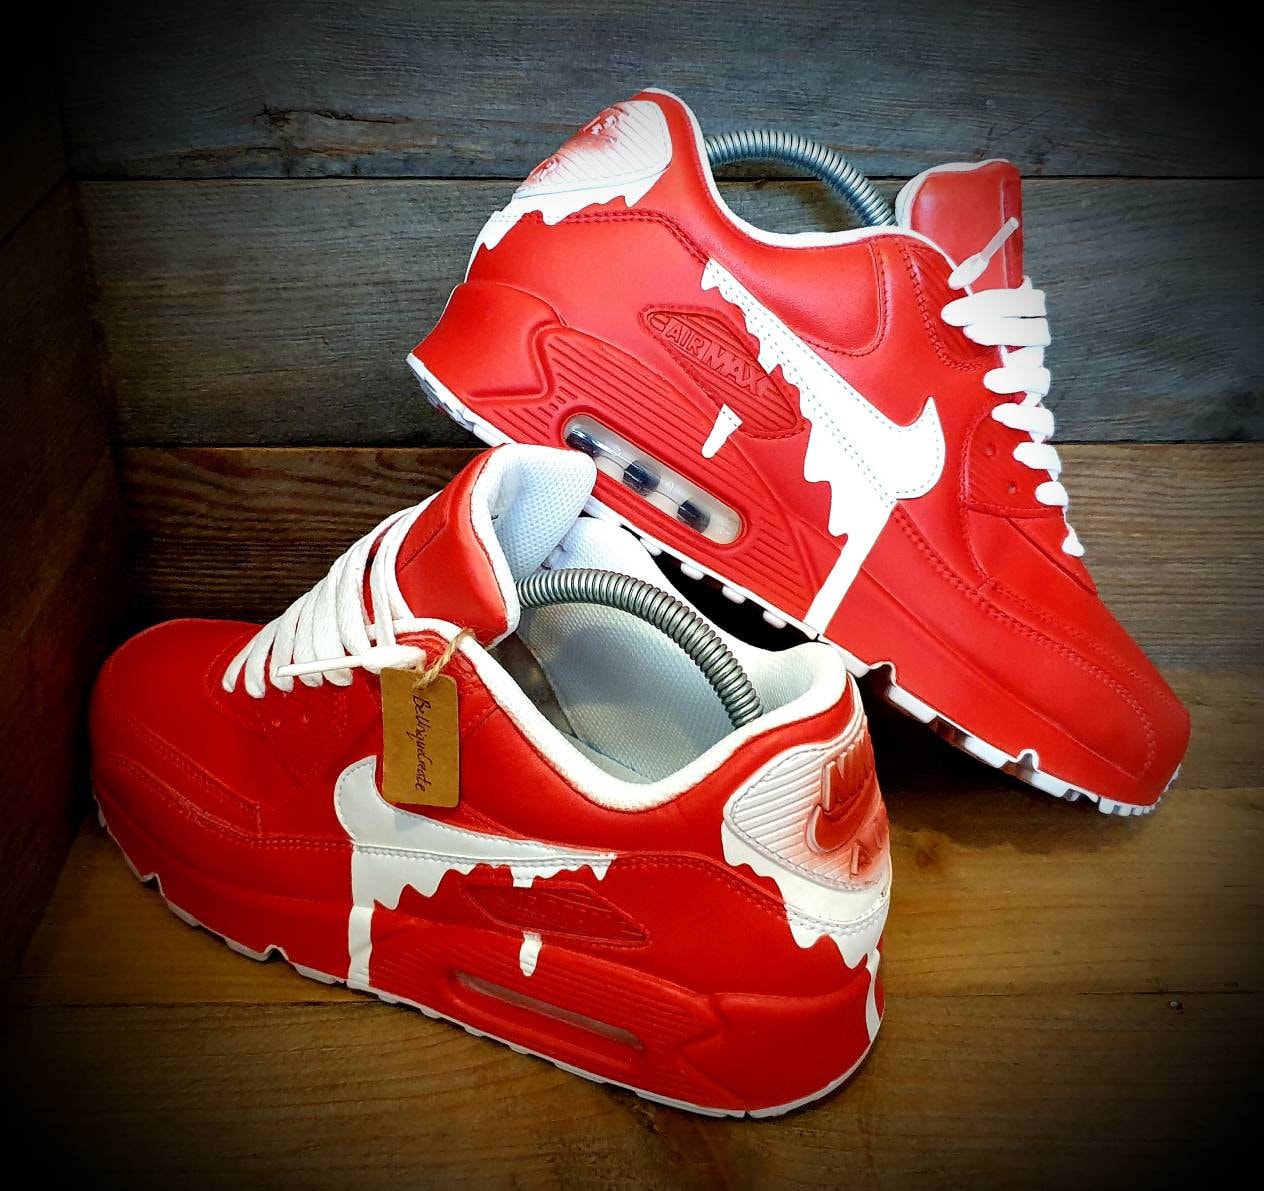 Custom Nike Air Max 90 Candy Red Drip + Time Lapse 